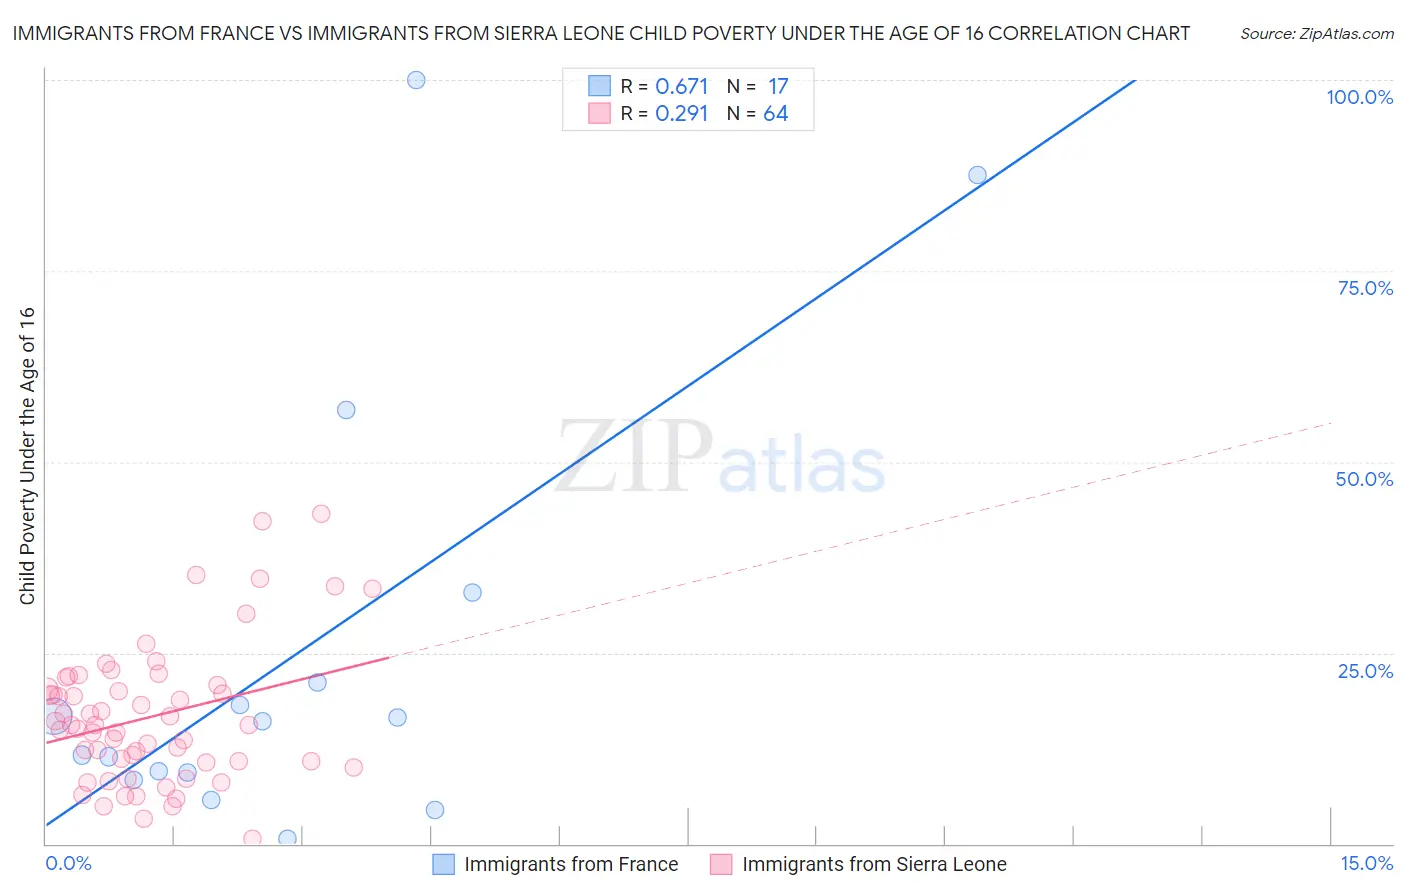 Immigrants from France vs Immigrants from Sierra Leone Child Poverty Under the Age of 16